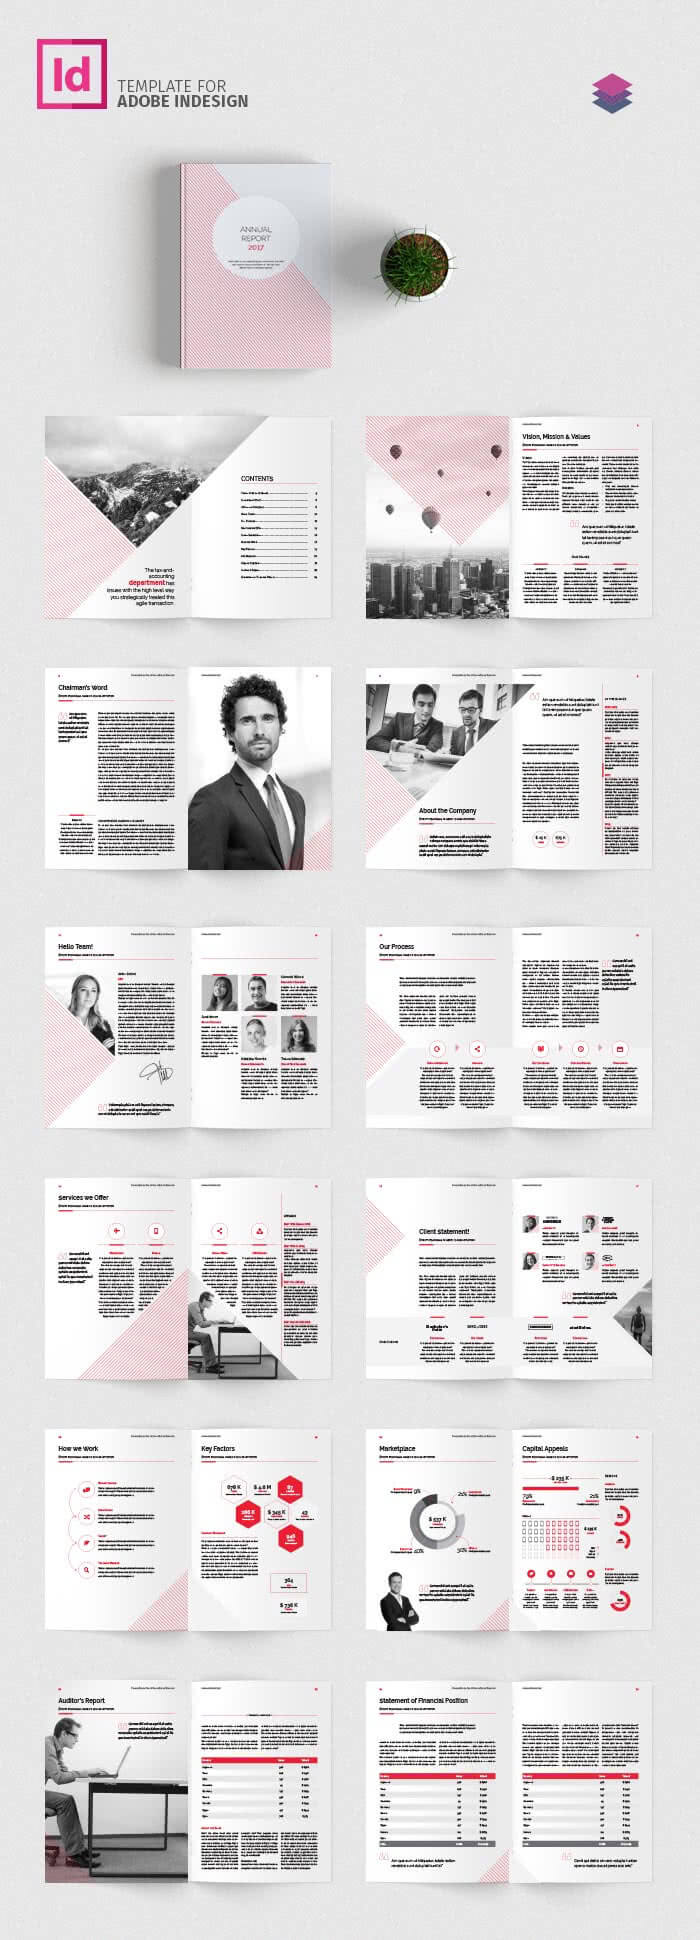 75 Fresh Indesign Templates And Where To Find More Inside Adobe Indesign Brochure Templates